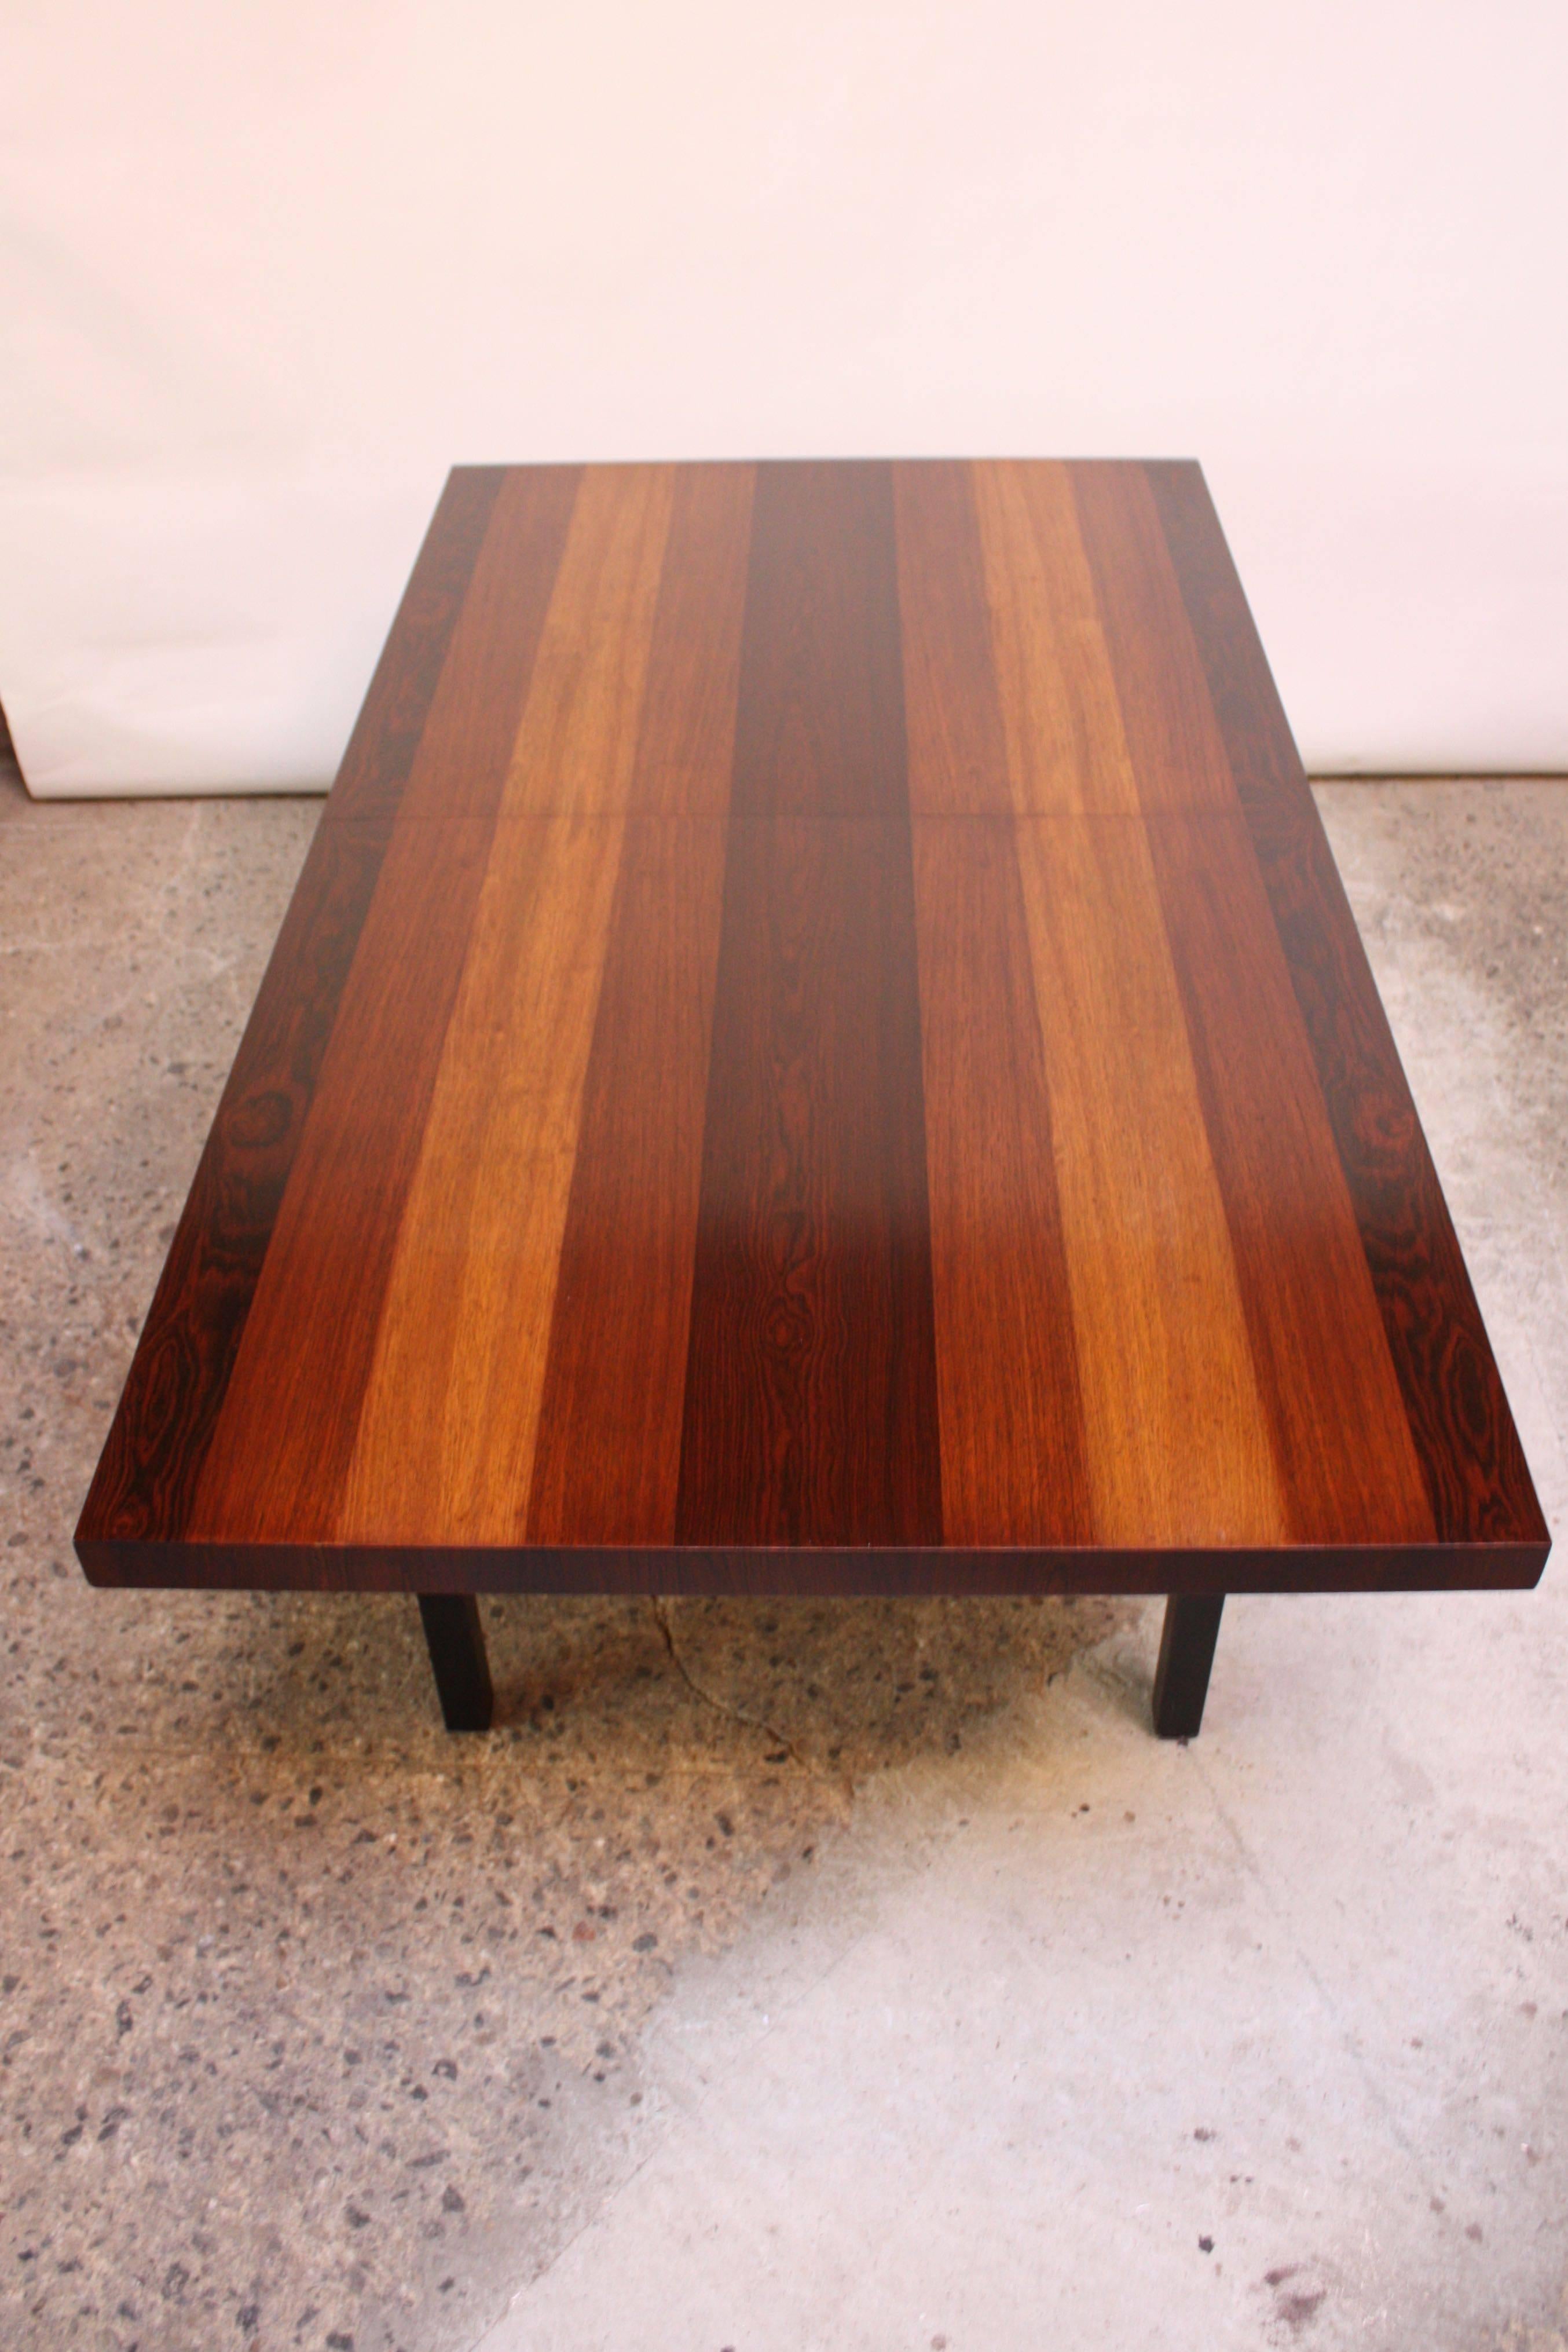 Mid-Century Modern Milo Baughman Mixed Wood Dining Table for Directional